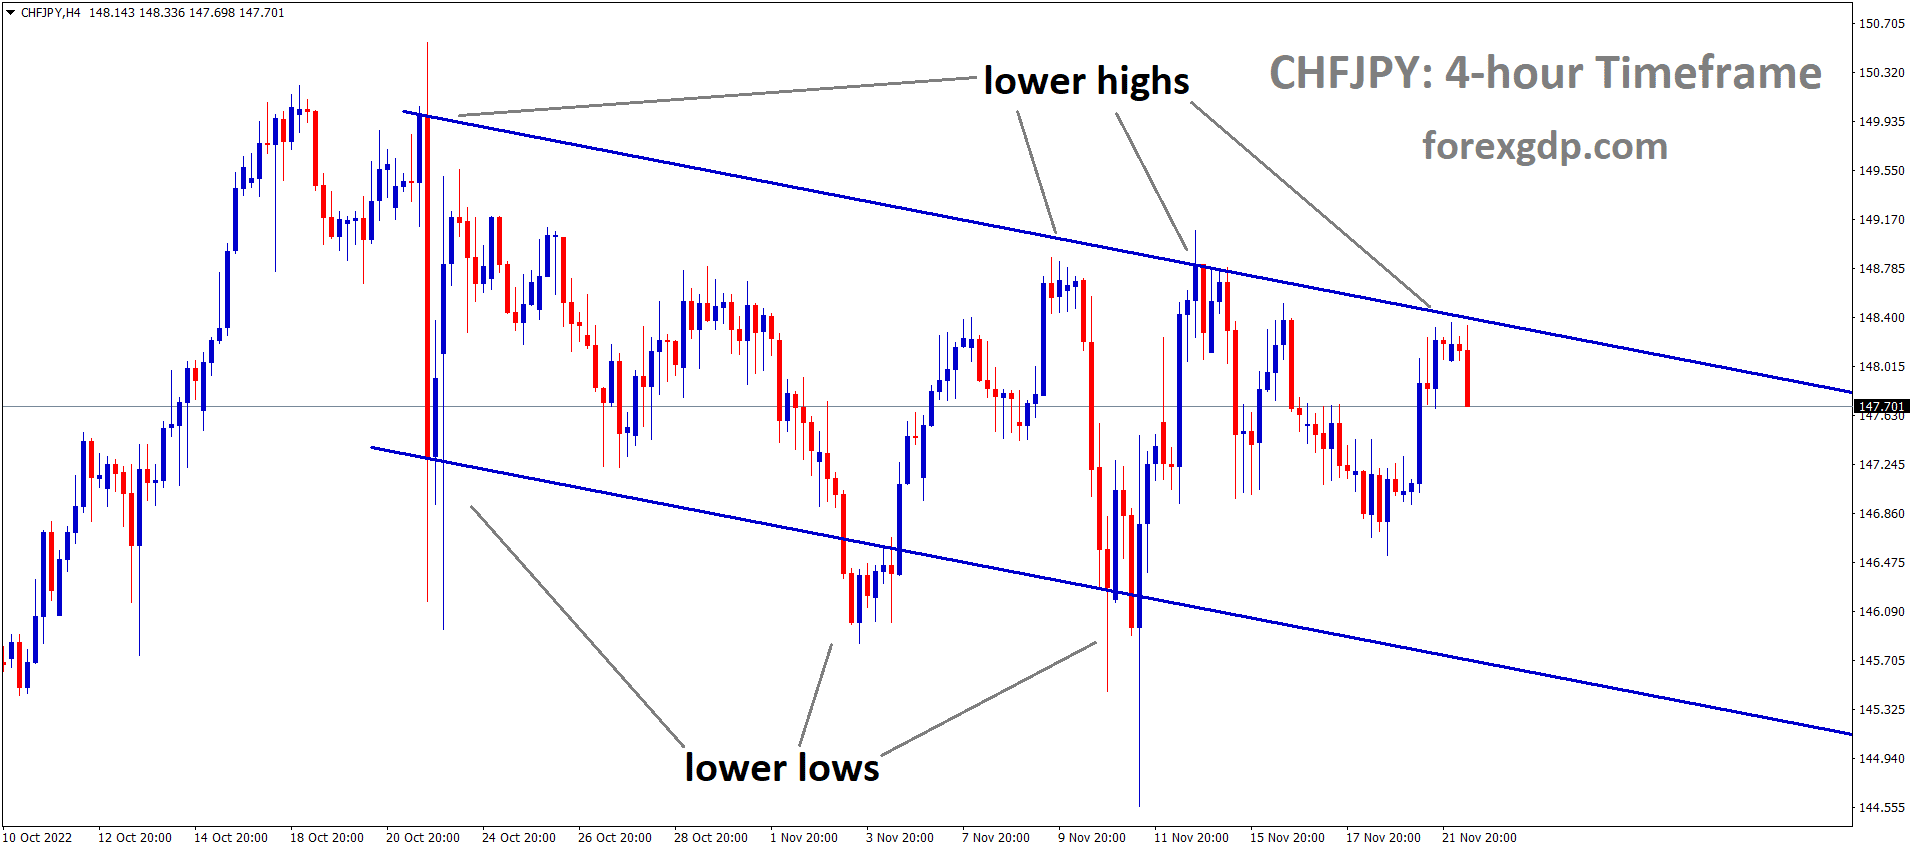 CHFJPY is moving in the Descending channel and the market has fallen from the lower high area of the channel.